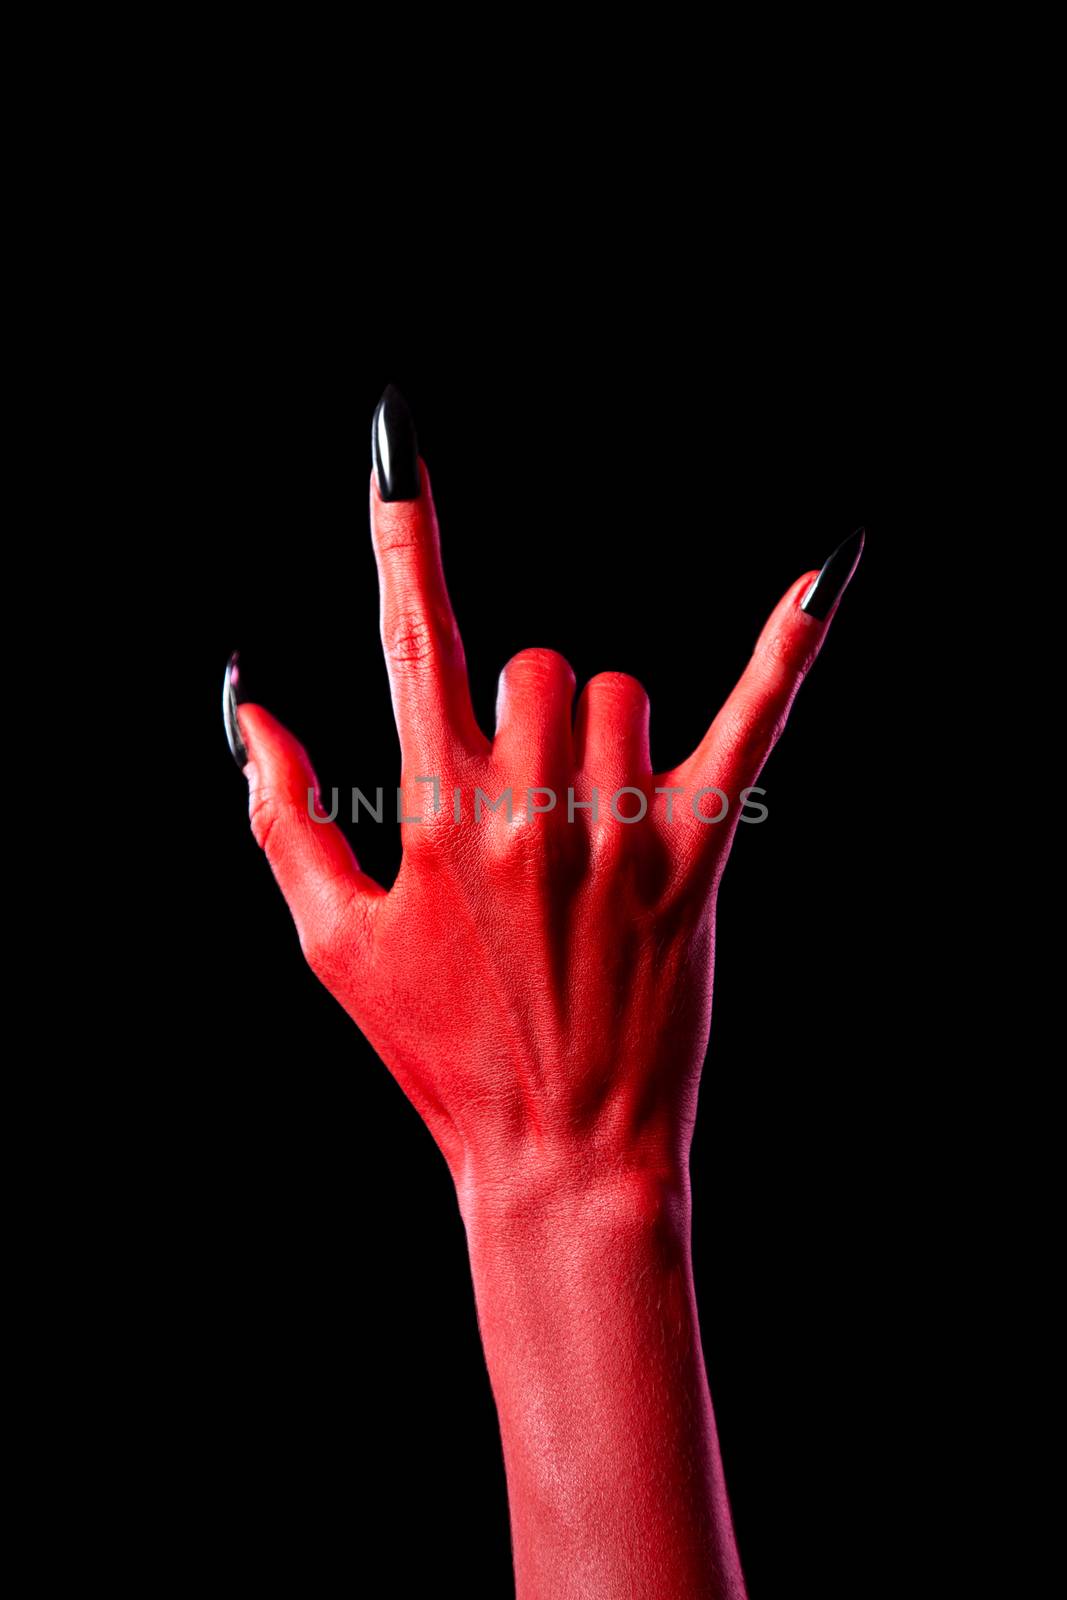 Devil hand showing heavy metal gesture, isolated on black background  